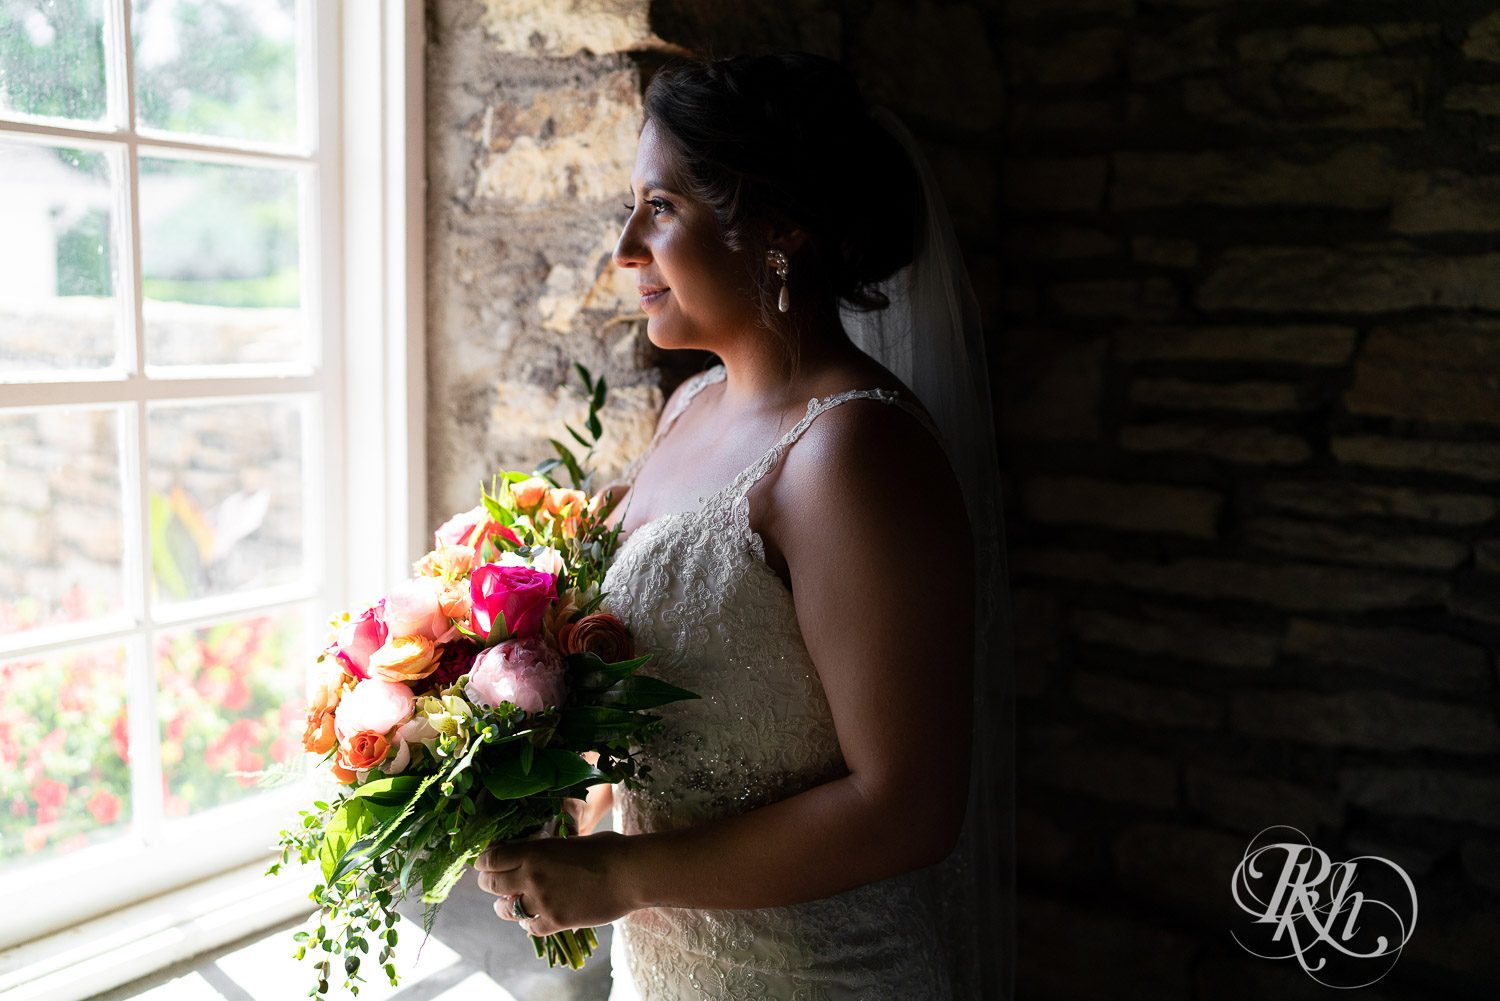 Bride holding flowers looking out the window at summer brunch wedding at Mayowood Stone Barn in Rochester, Minnesota.